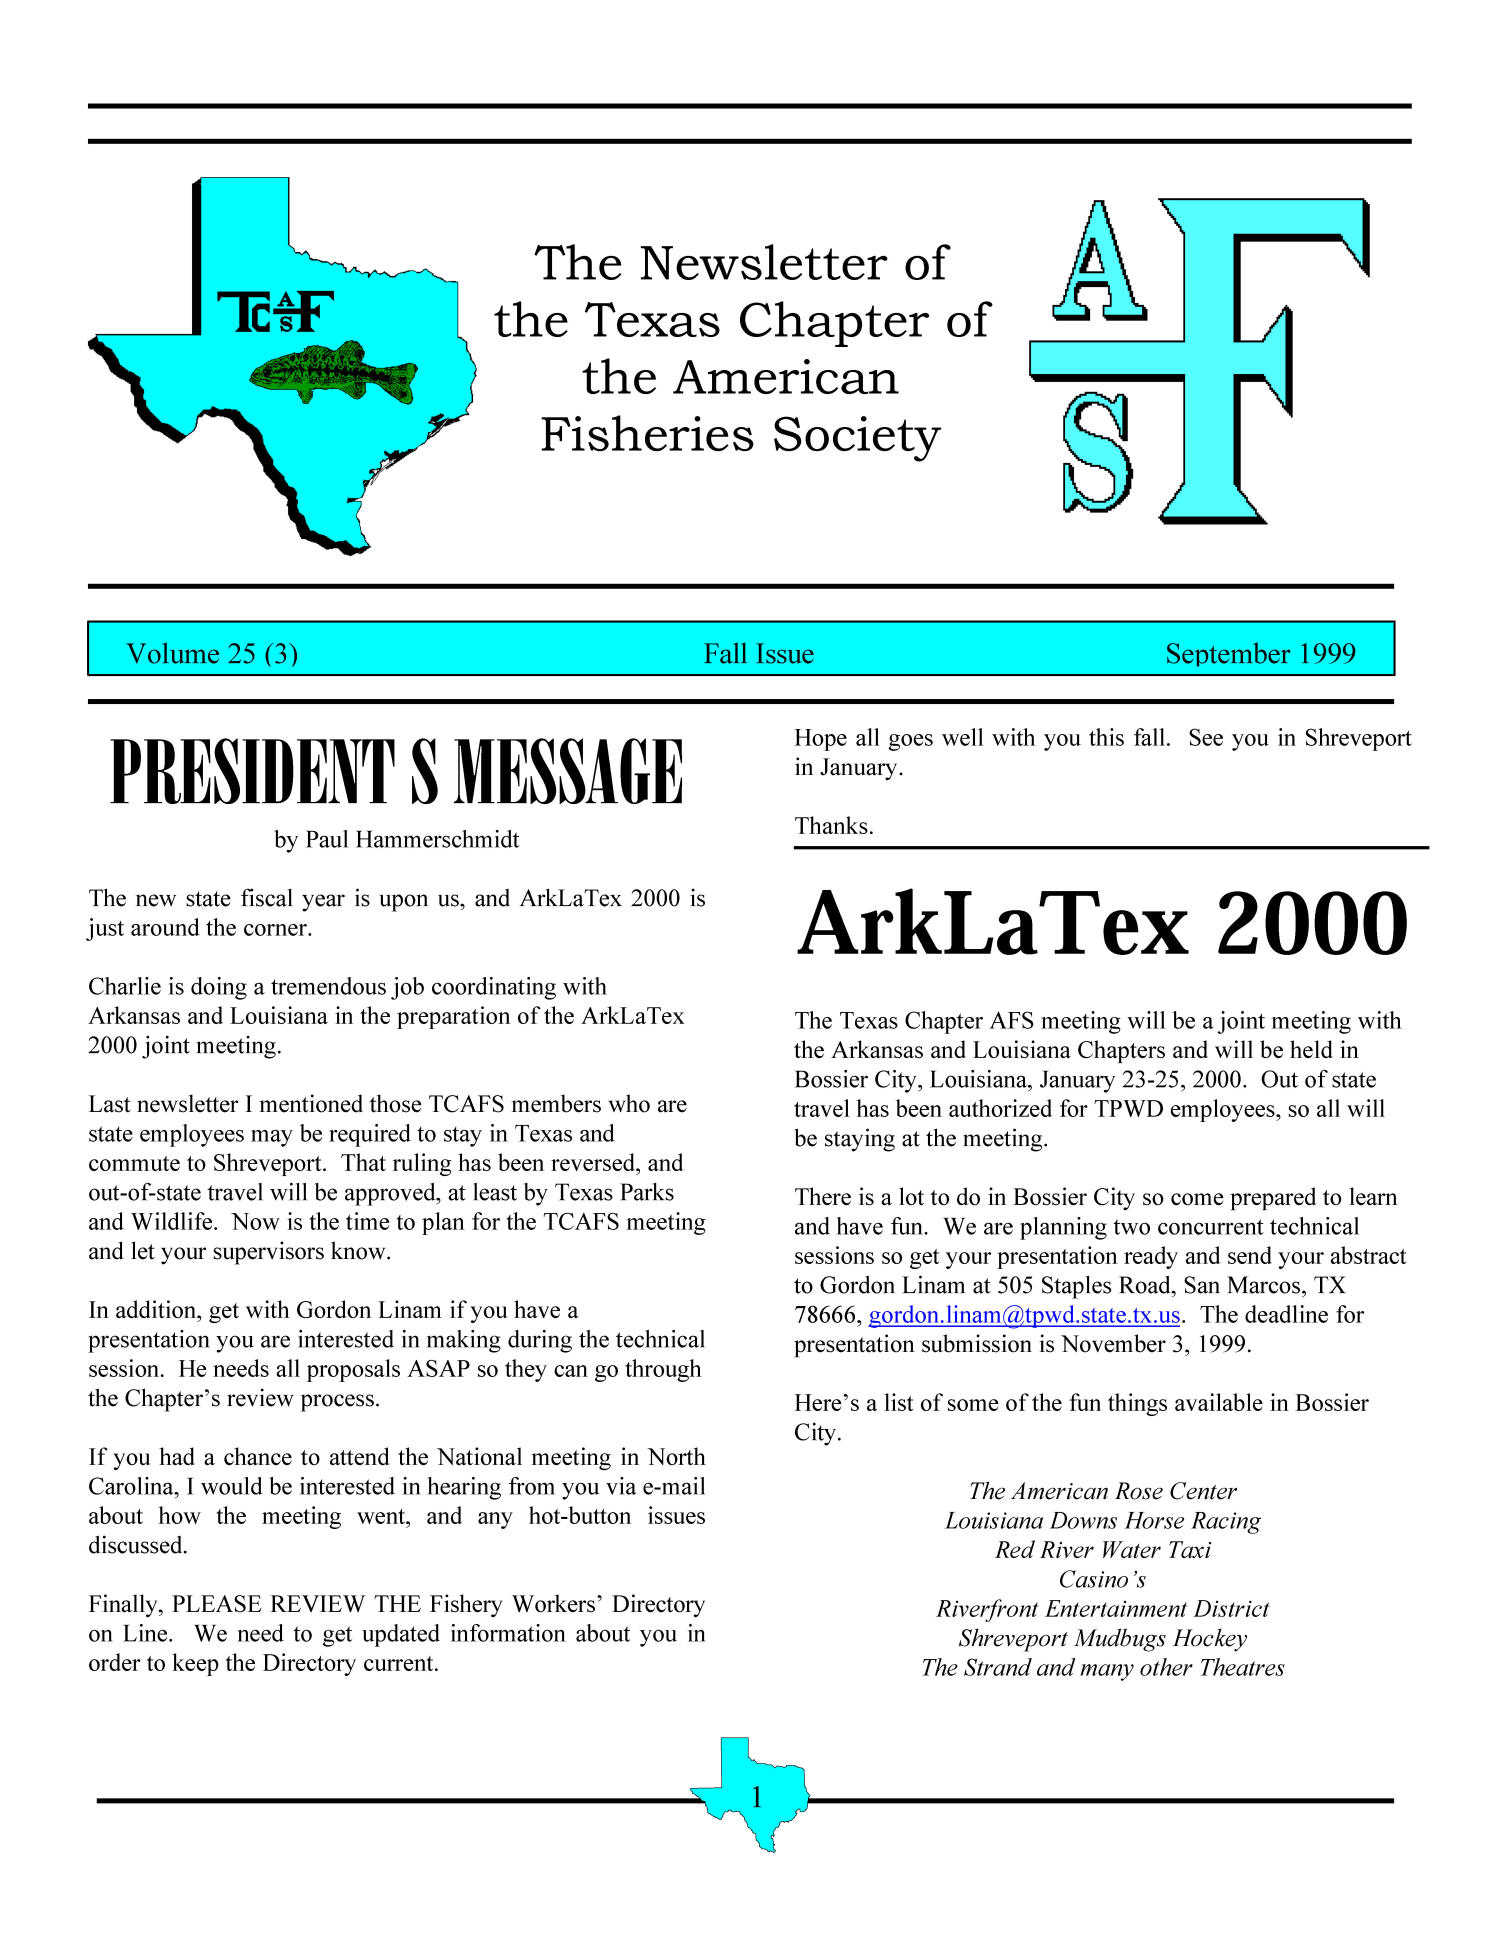 The Newsletter of the Texas Chapter of the American Fisheries Society, Volume 25, Number 3, Fall 1999
                                                
                                                    1
                                                